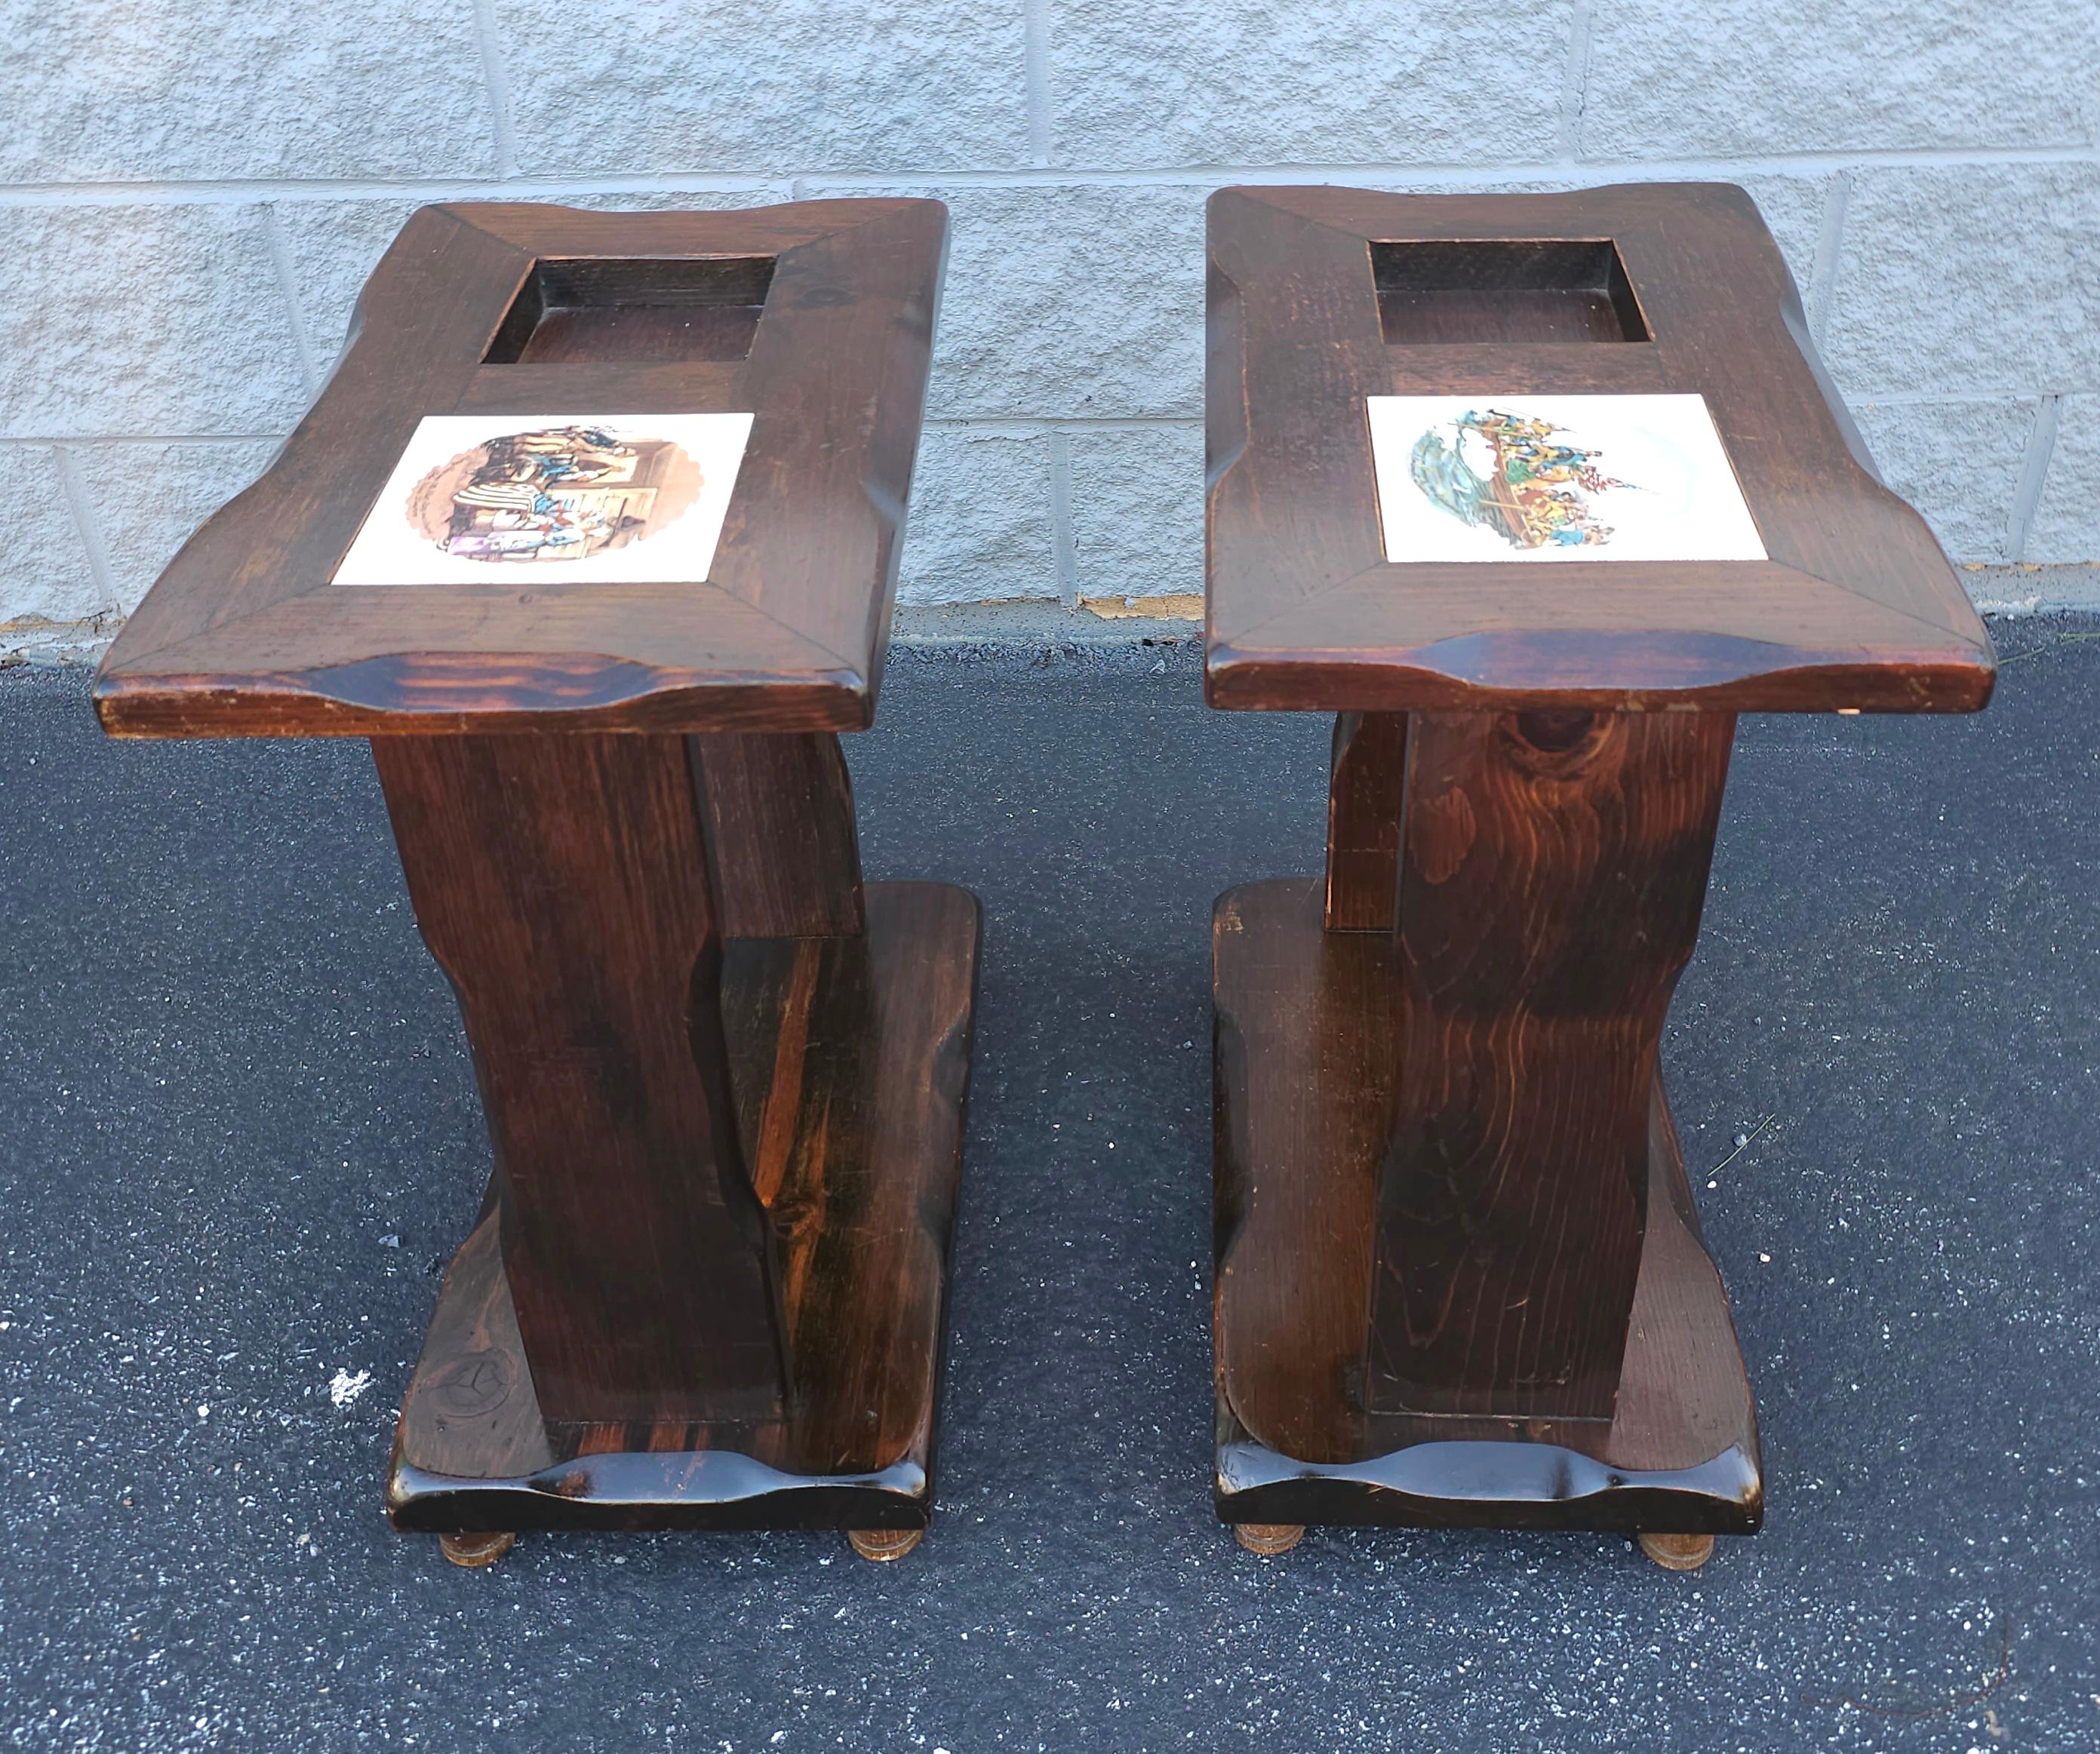 A Pair of Mid-Century Old Tavern Style Antiqued Pine Two-Tier  Side Tables with decorative ceramic inserts. Measures 12